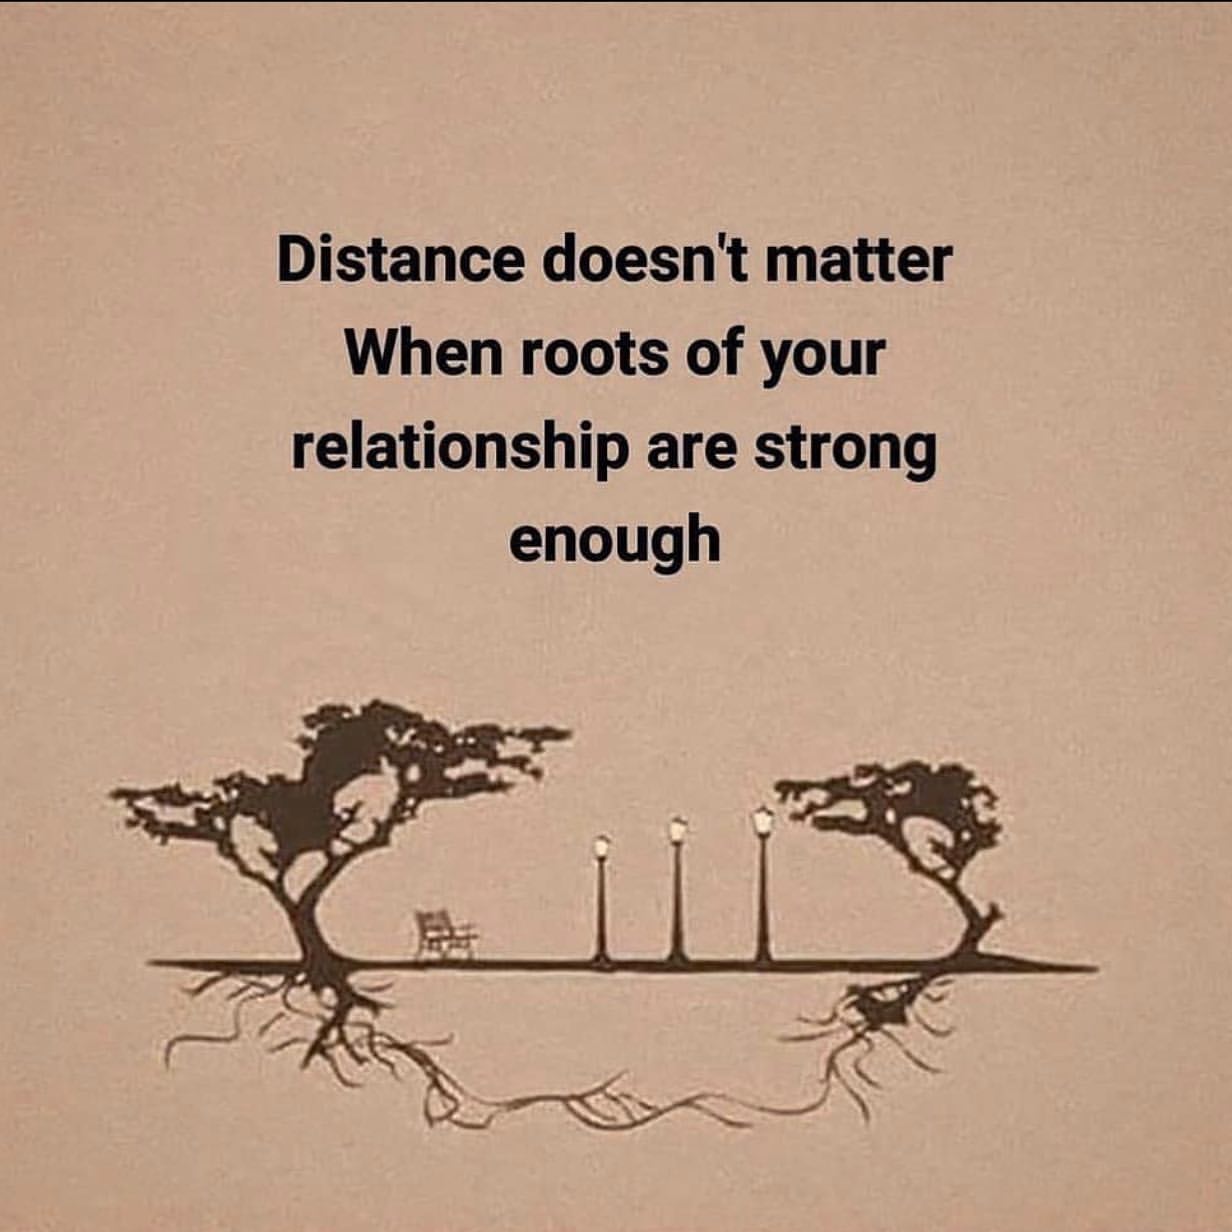 Distance doesn't matter when roots of your relationship are strong enough.